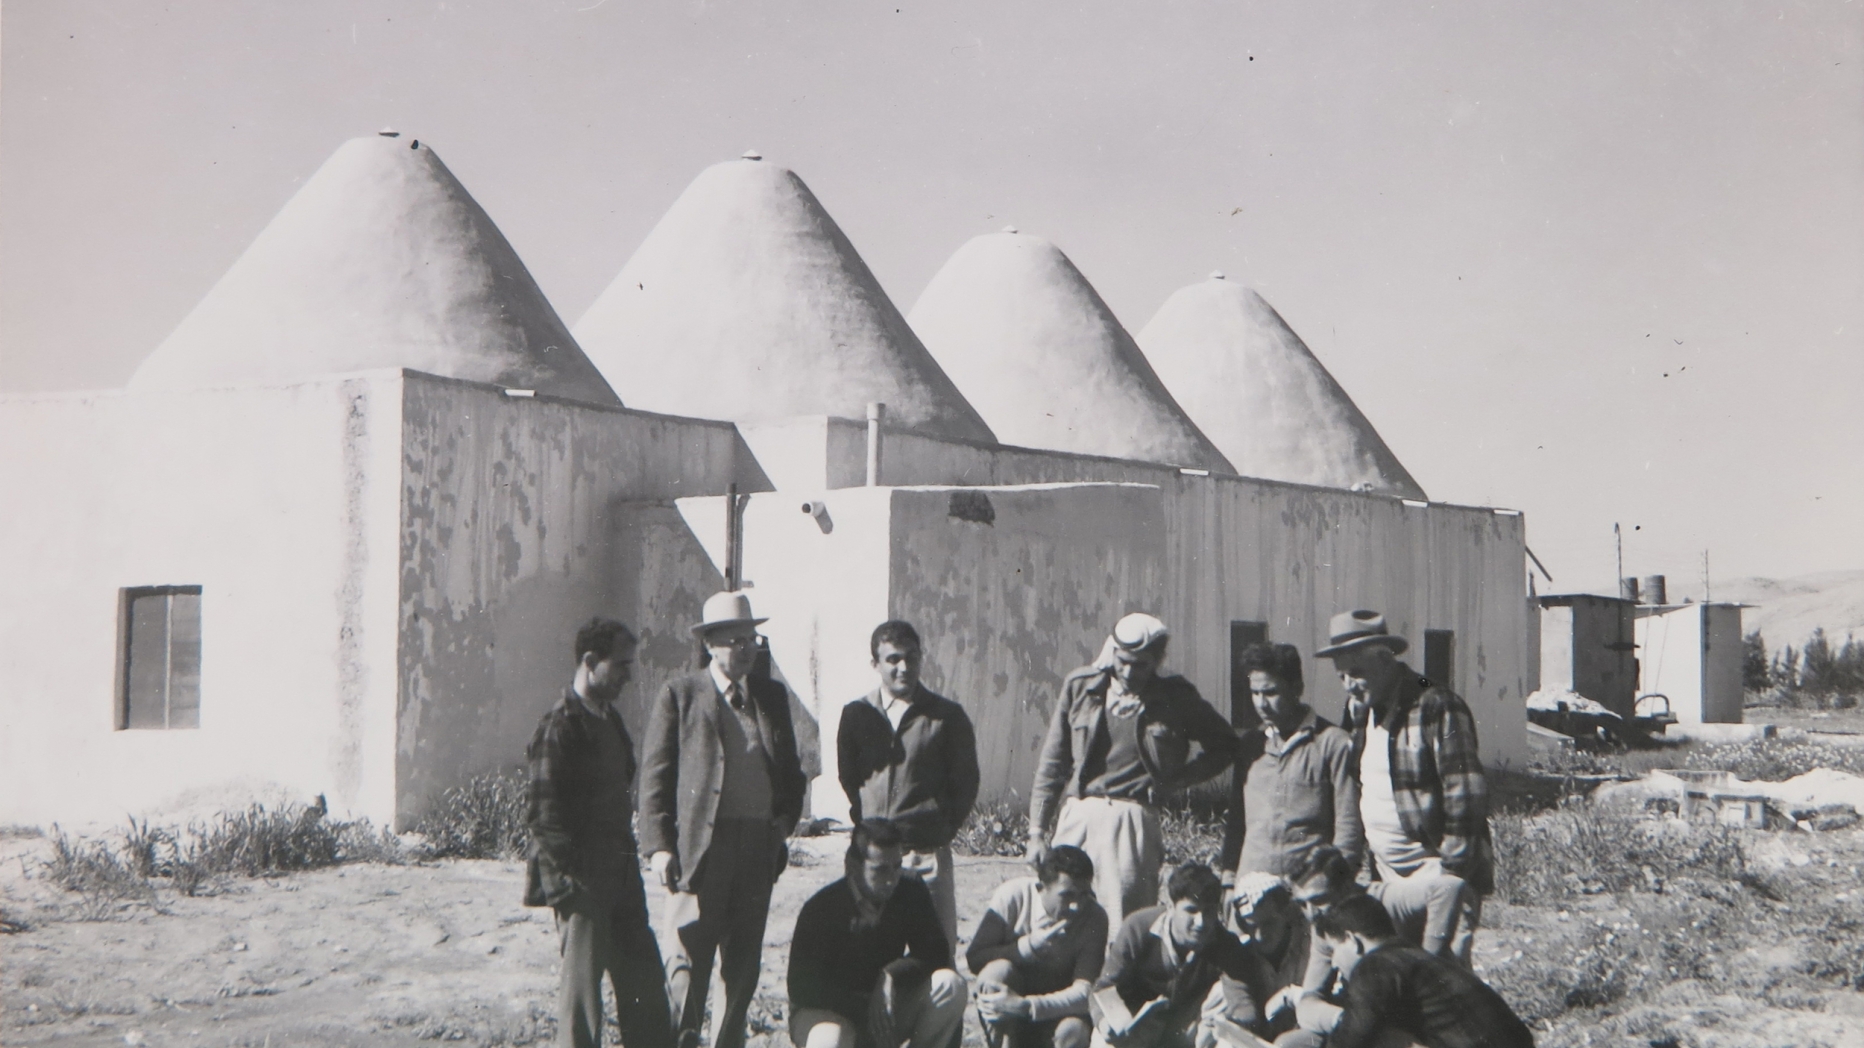 B&W photo of people standing outside of building with several conic structures for a roof